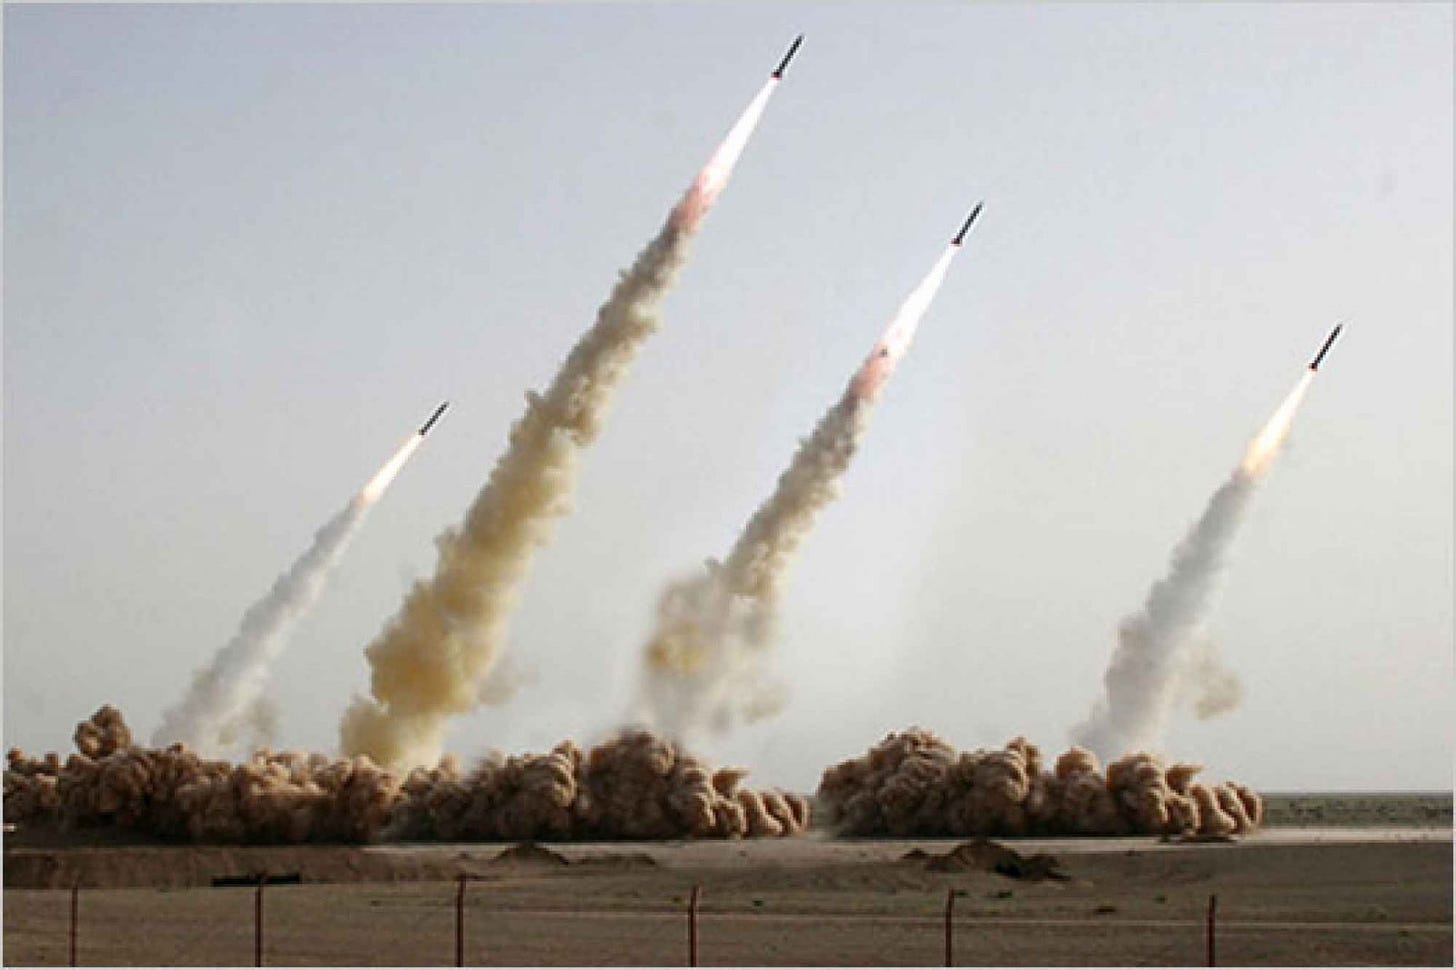 Iran carries out new ballistic missile test - Tactical Sh*t